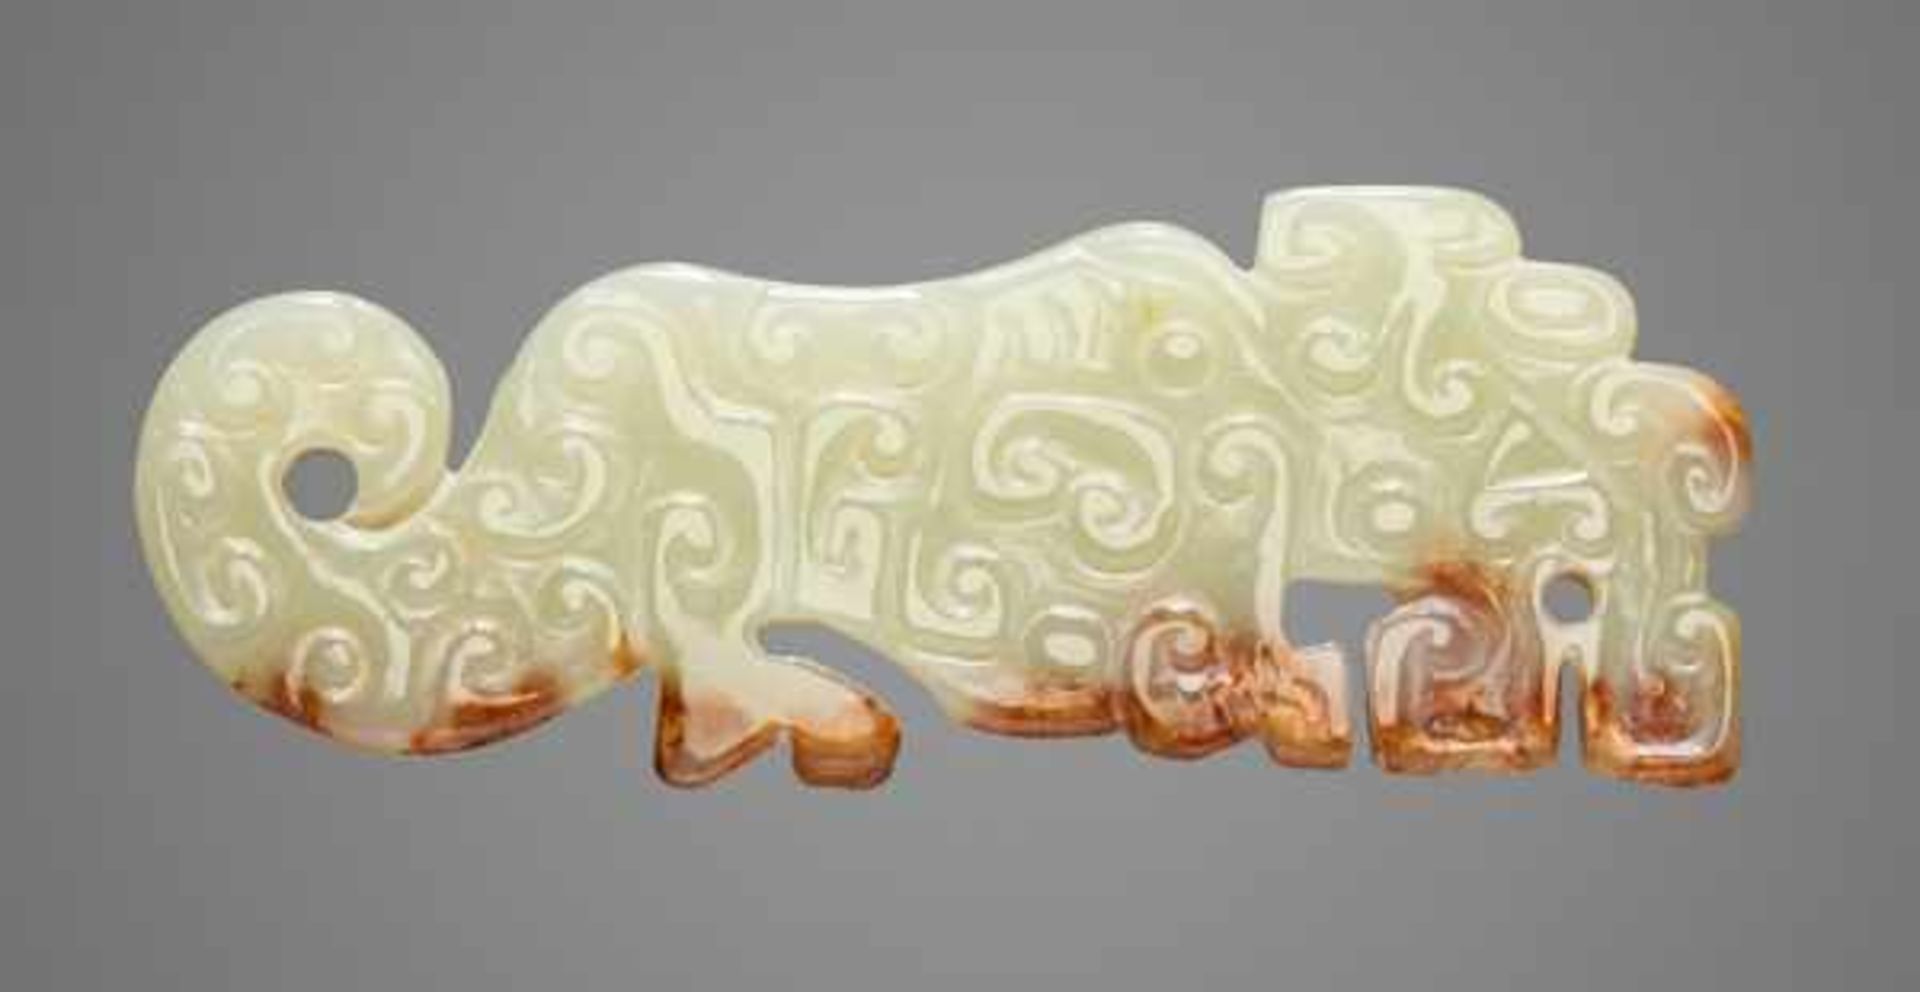 SMALL TIGER-SHAPED ORNAMENT IN TRANSLUCENT GREEN JADE Jade, China. Eastern Zhou, late Spring and